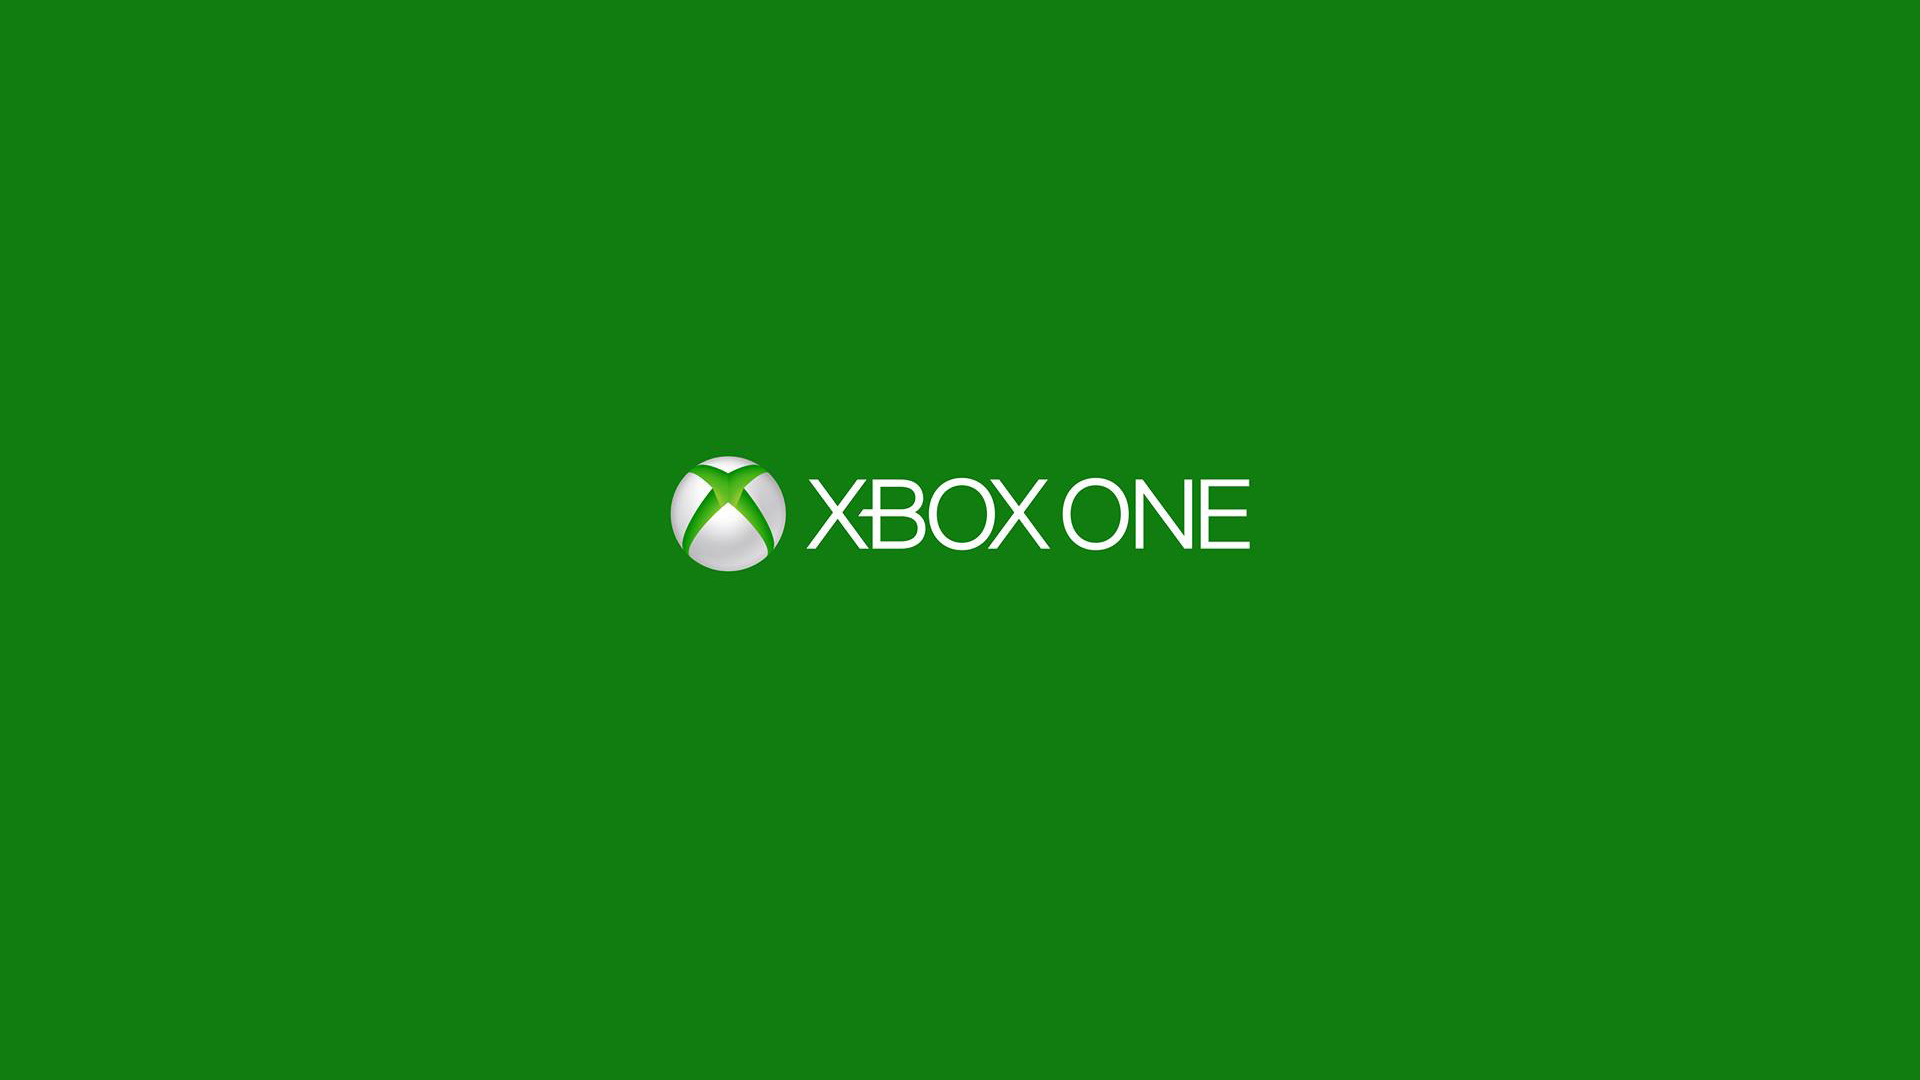 1920x1080 xbox one wallpaper xbox one wallpaper hey xbox one gamers